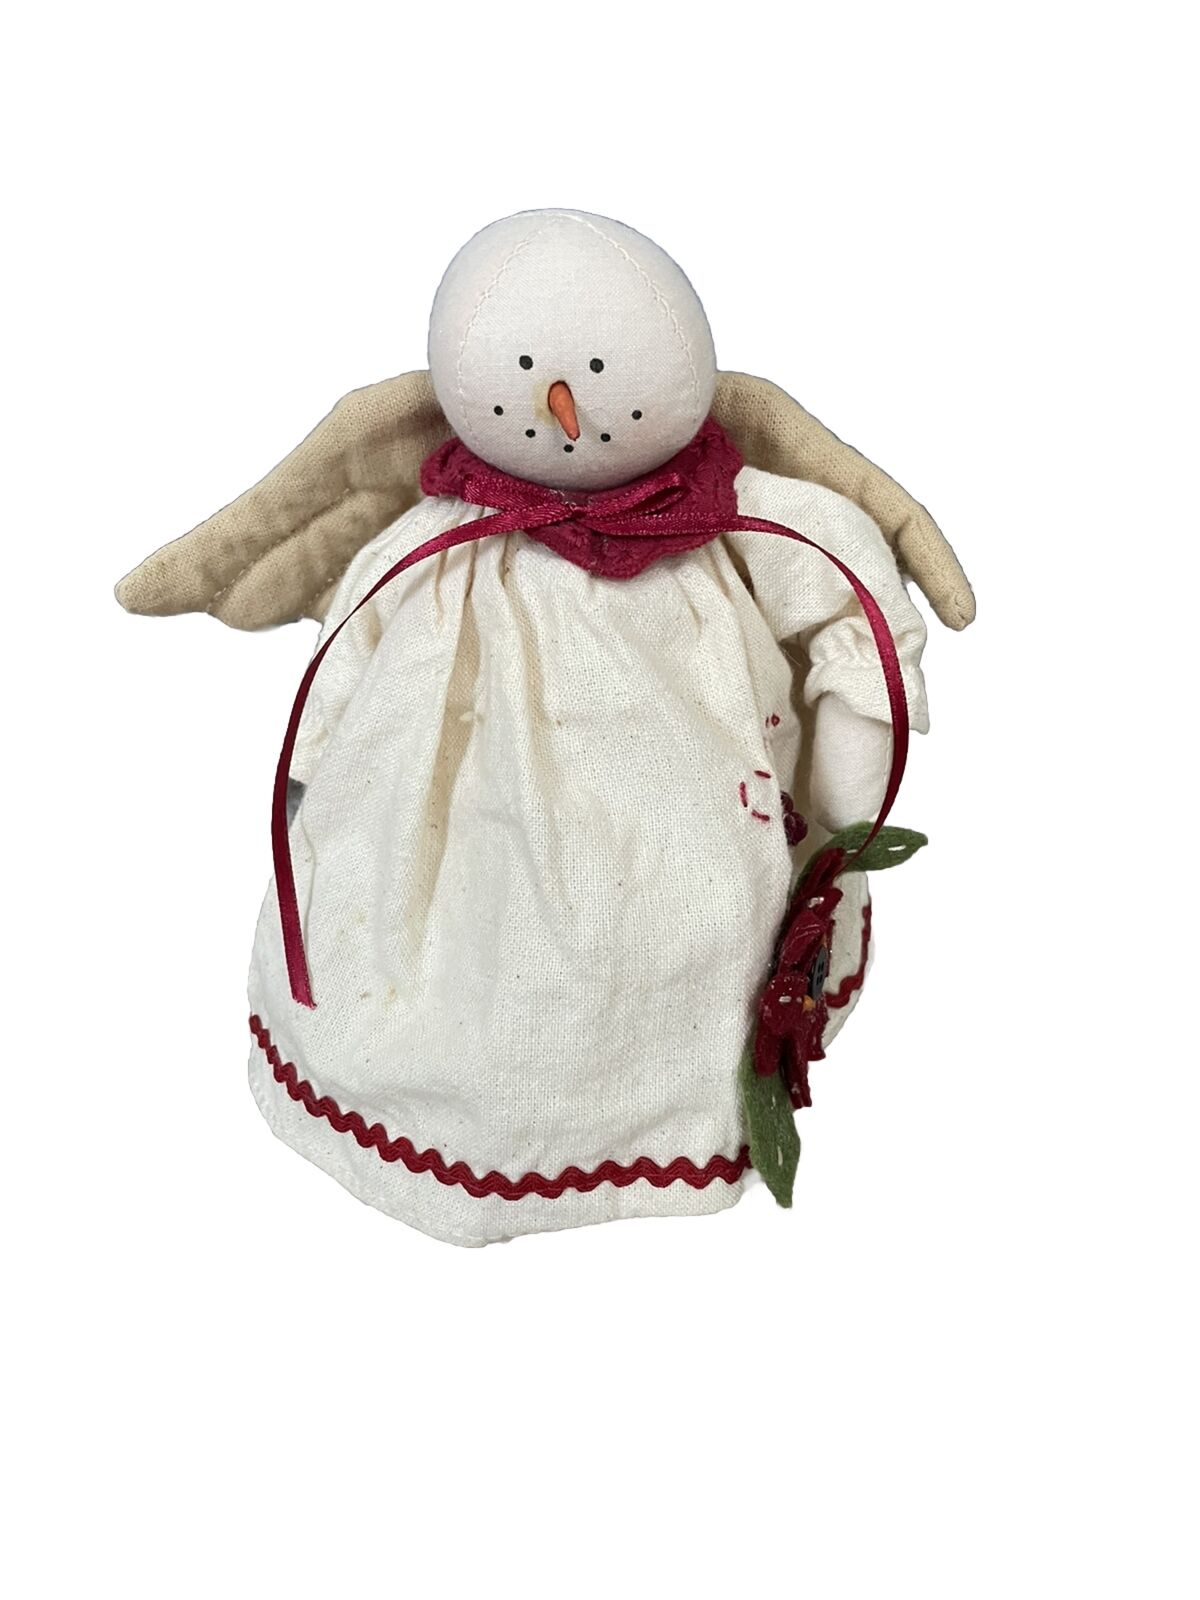 Delton Product Corp Fine Collectables Snowman Angel 8”